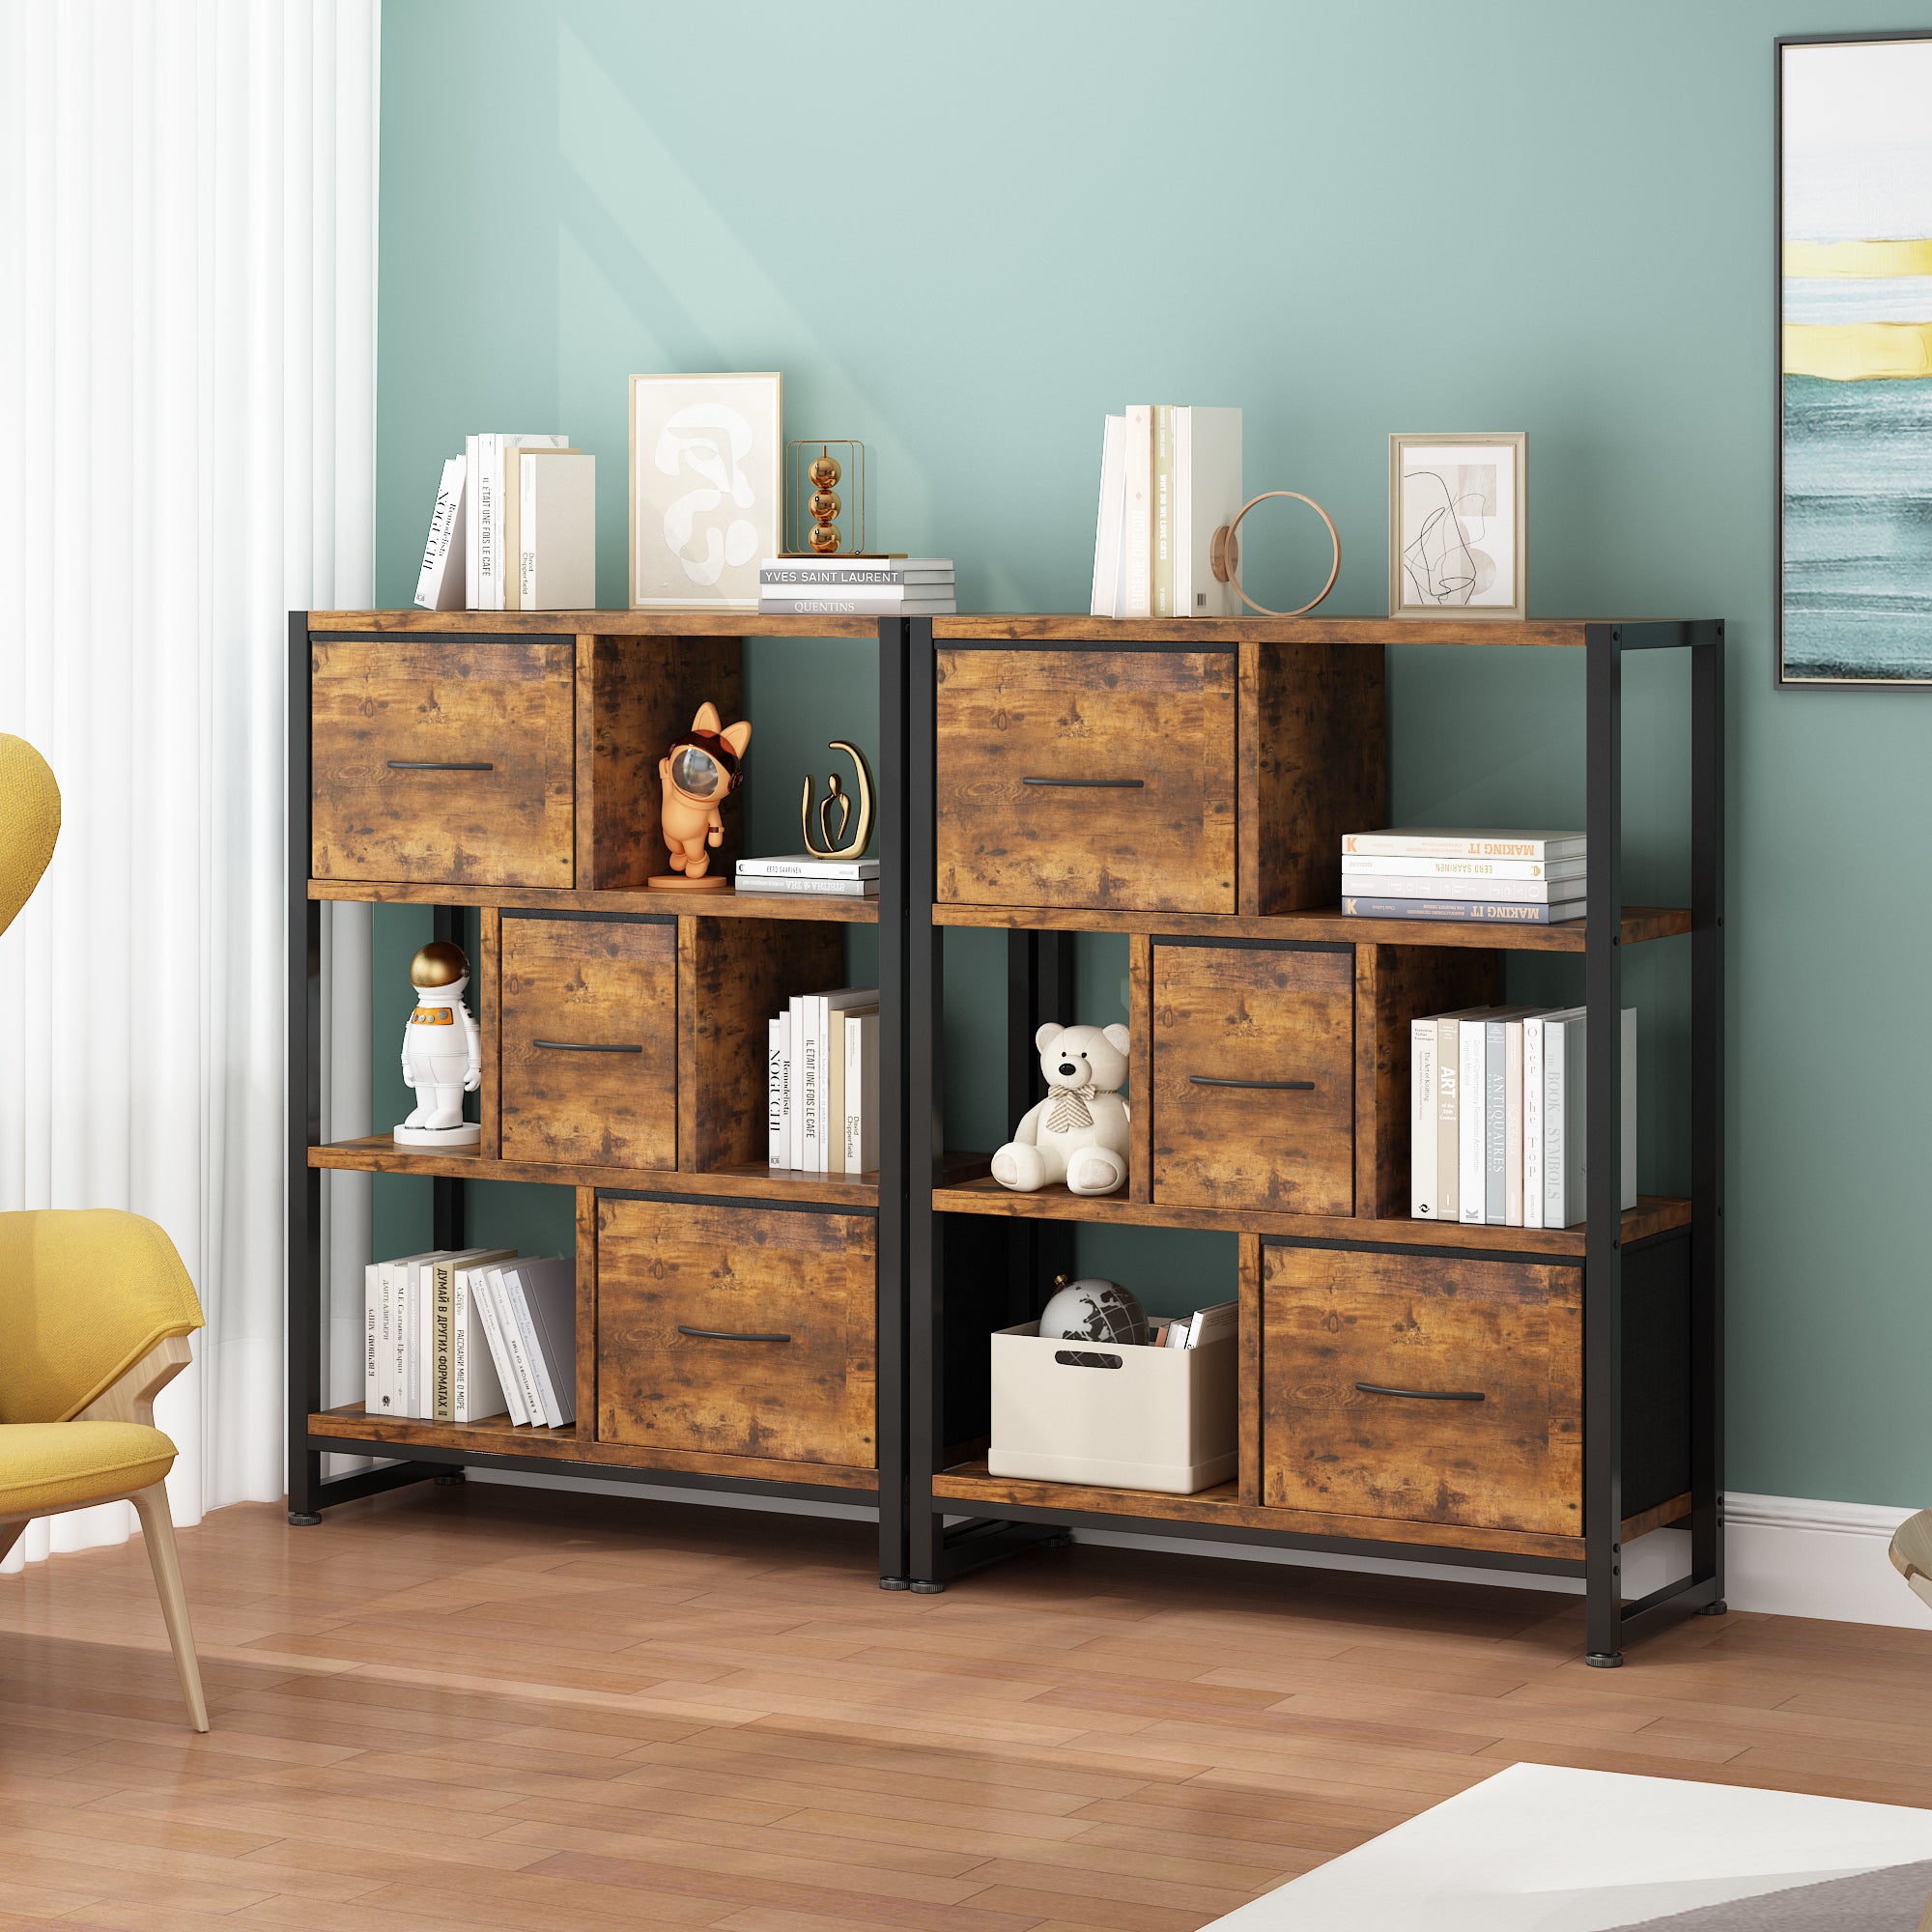 4-Layer Bookshelf with High Legs, Particle Board, Iron Frame – 80x30x103cm